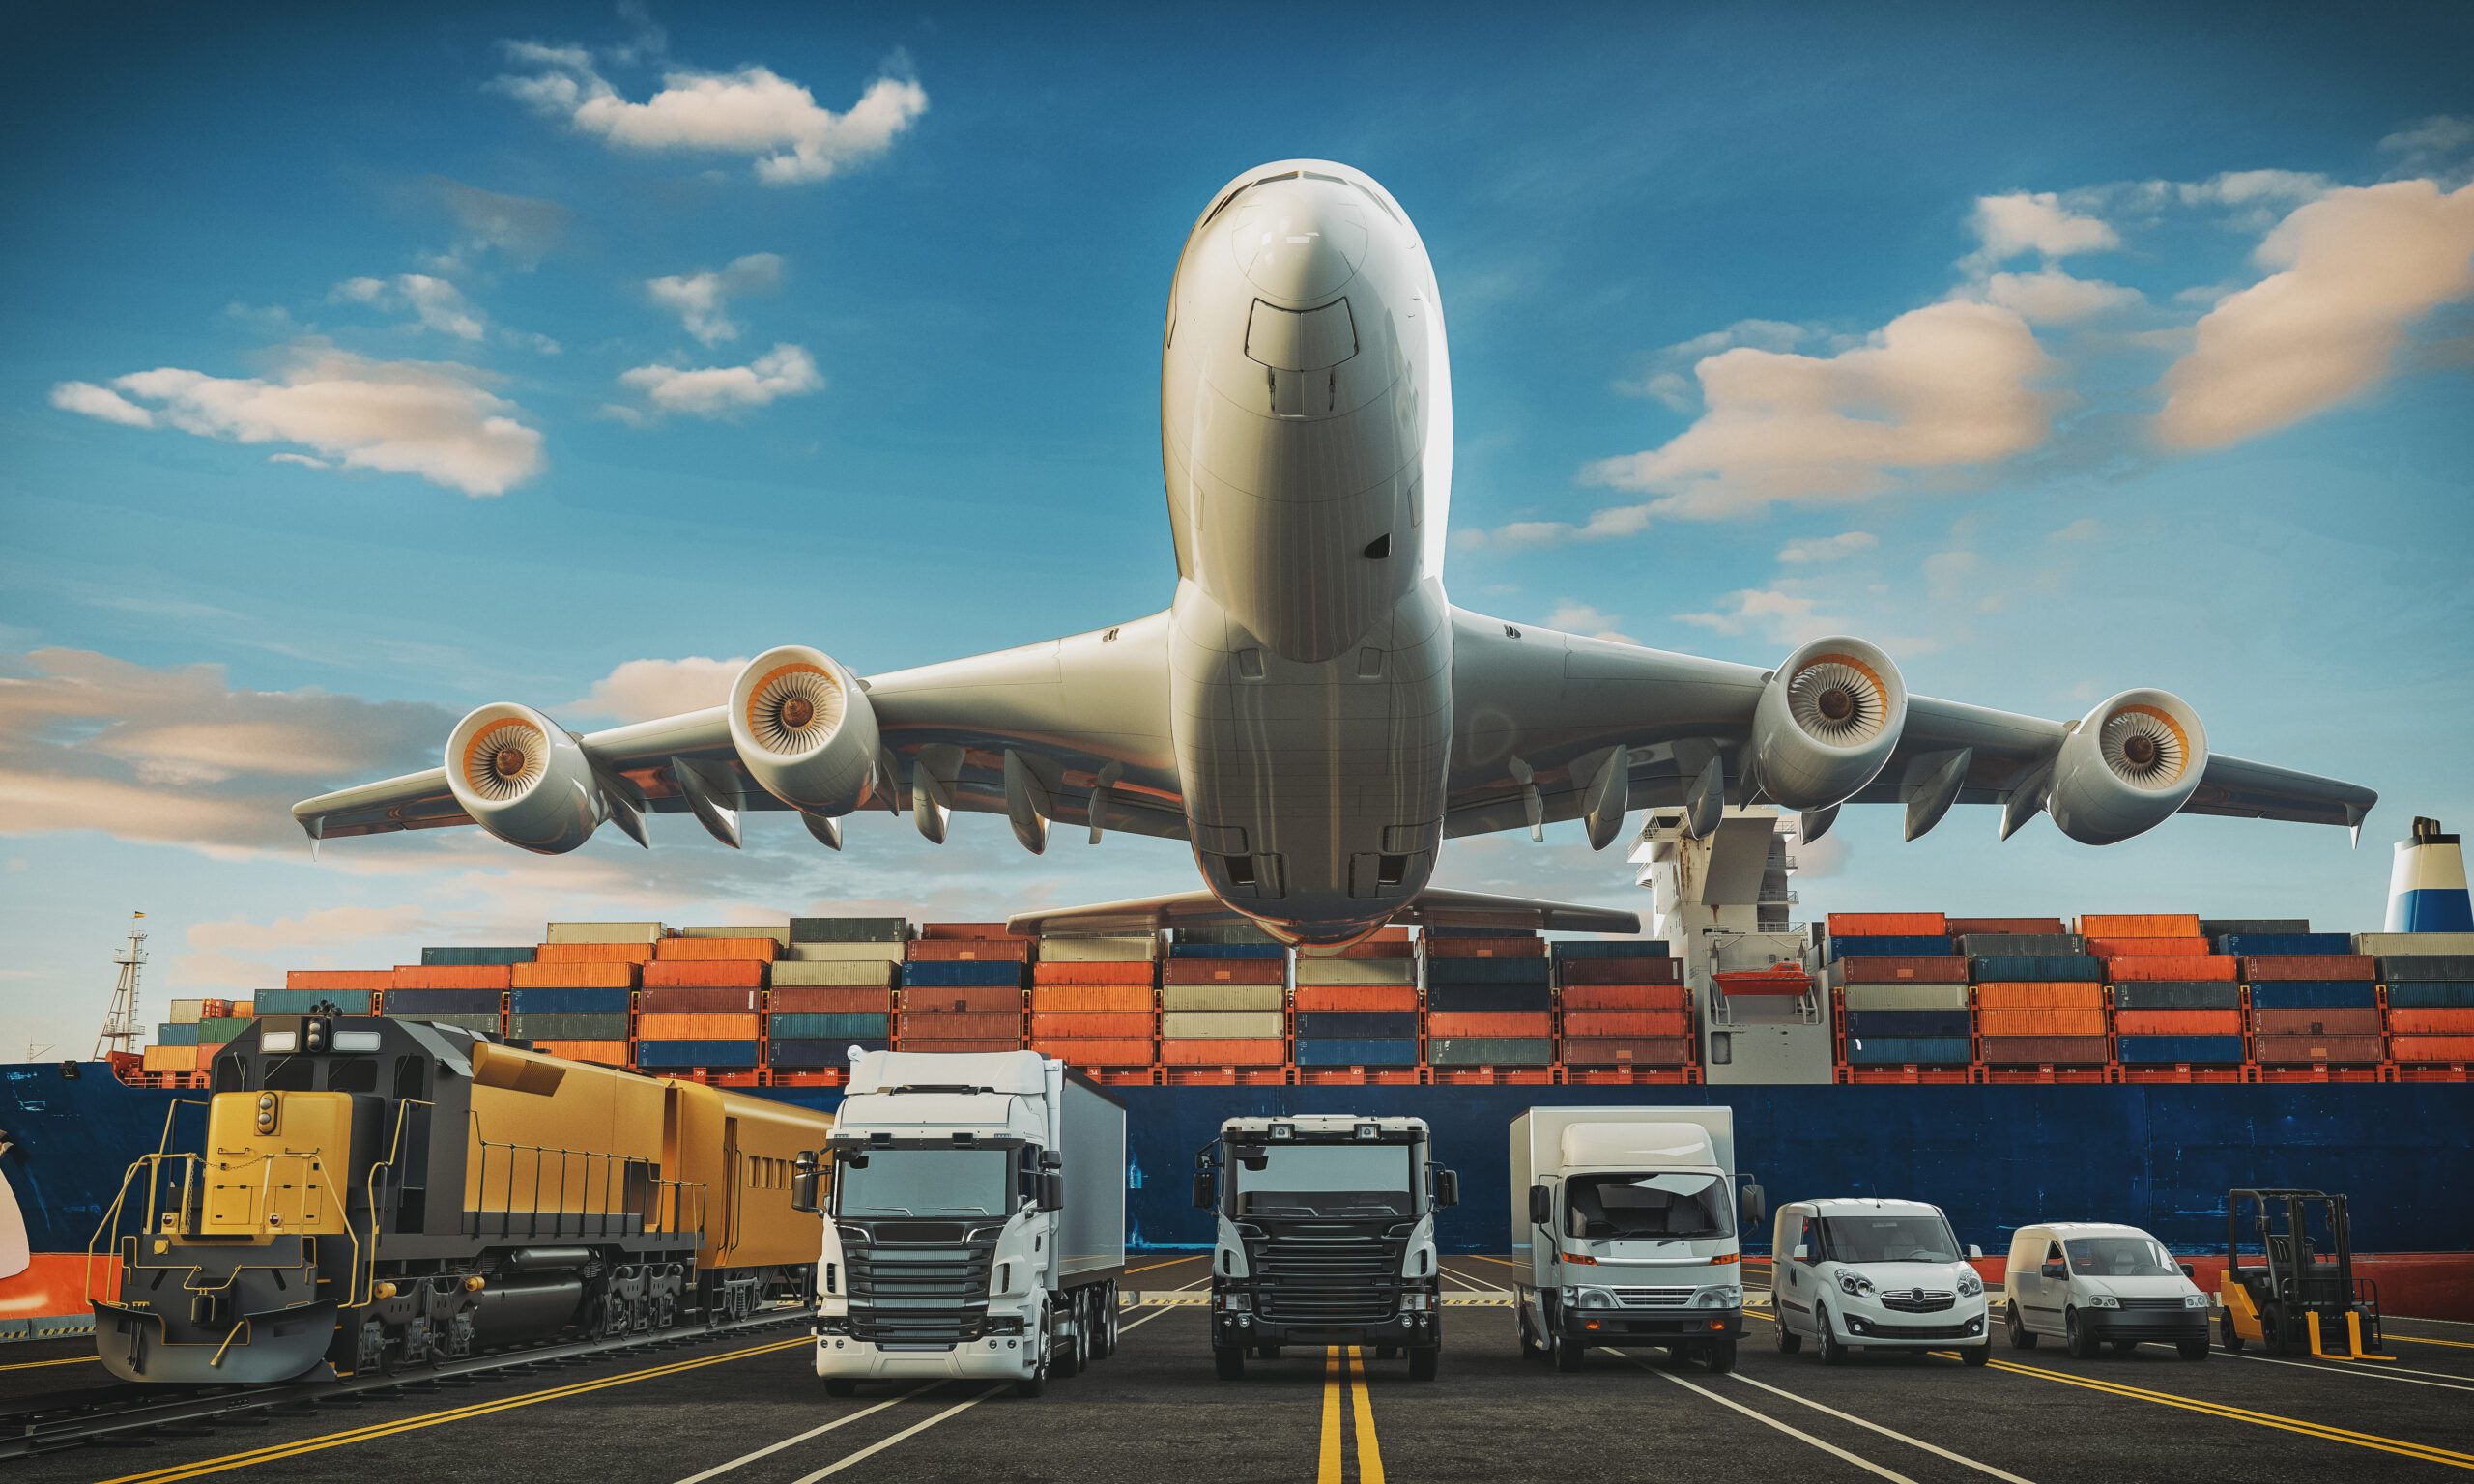 Transport trucks of various sizes ready to ship With a transport plane, the background is a container, a logistics concept.3d render and illustration.